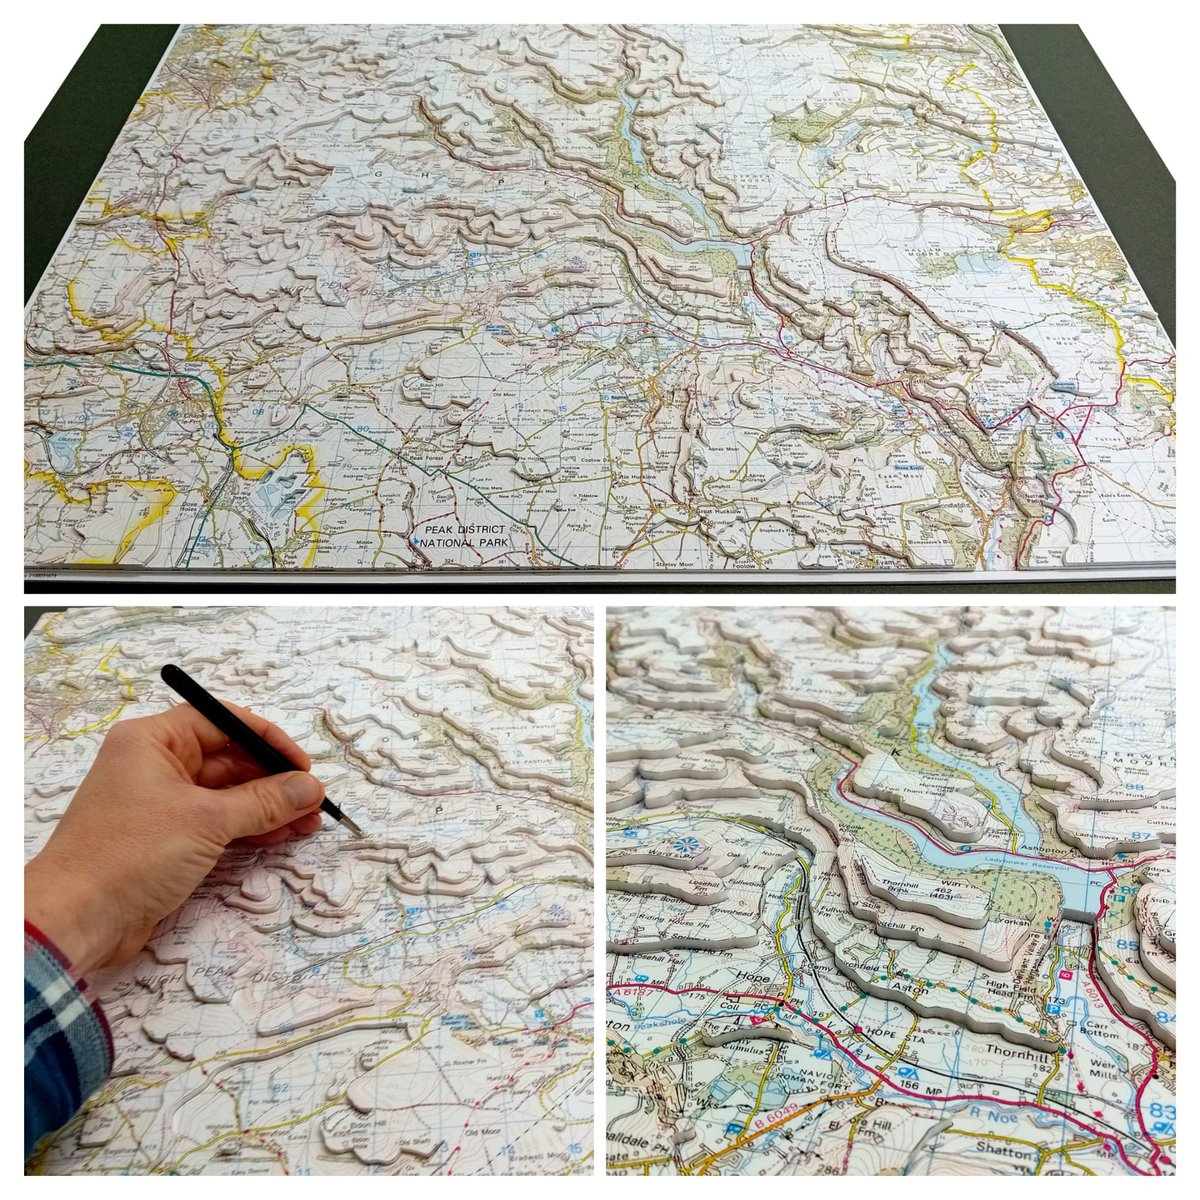 My latest hand cut #topographic model ready for framing next week | 841x594mm | The High Peak, Peak District National Park, #Derbyshire | made from #OSMaps | #gifts #topography #3d #maps #3dmap #walking #trekking #holdiays #birthdays #christmas